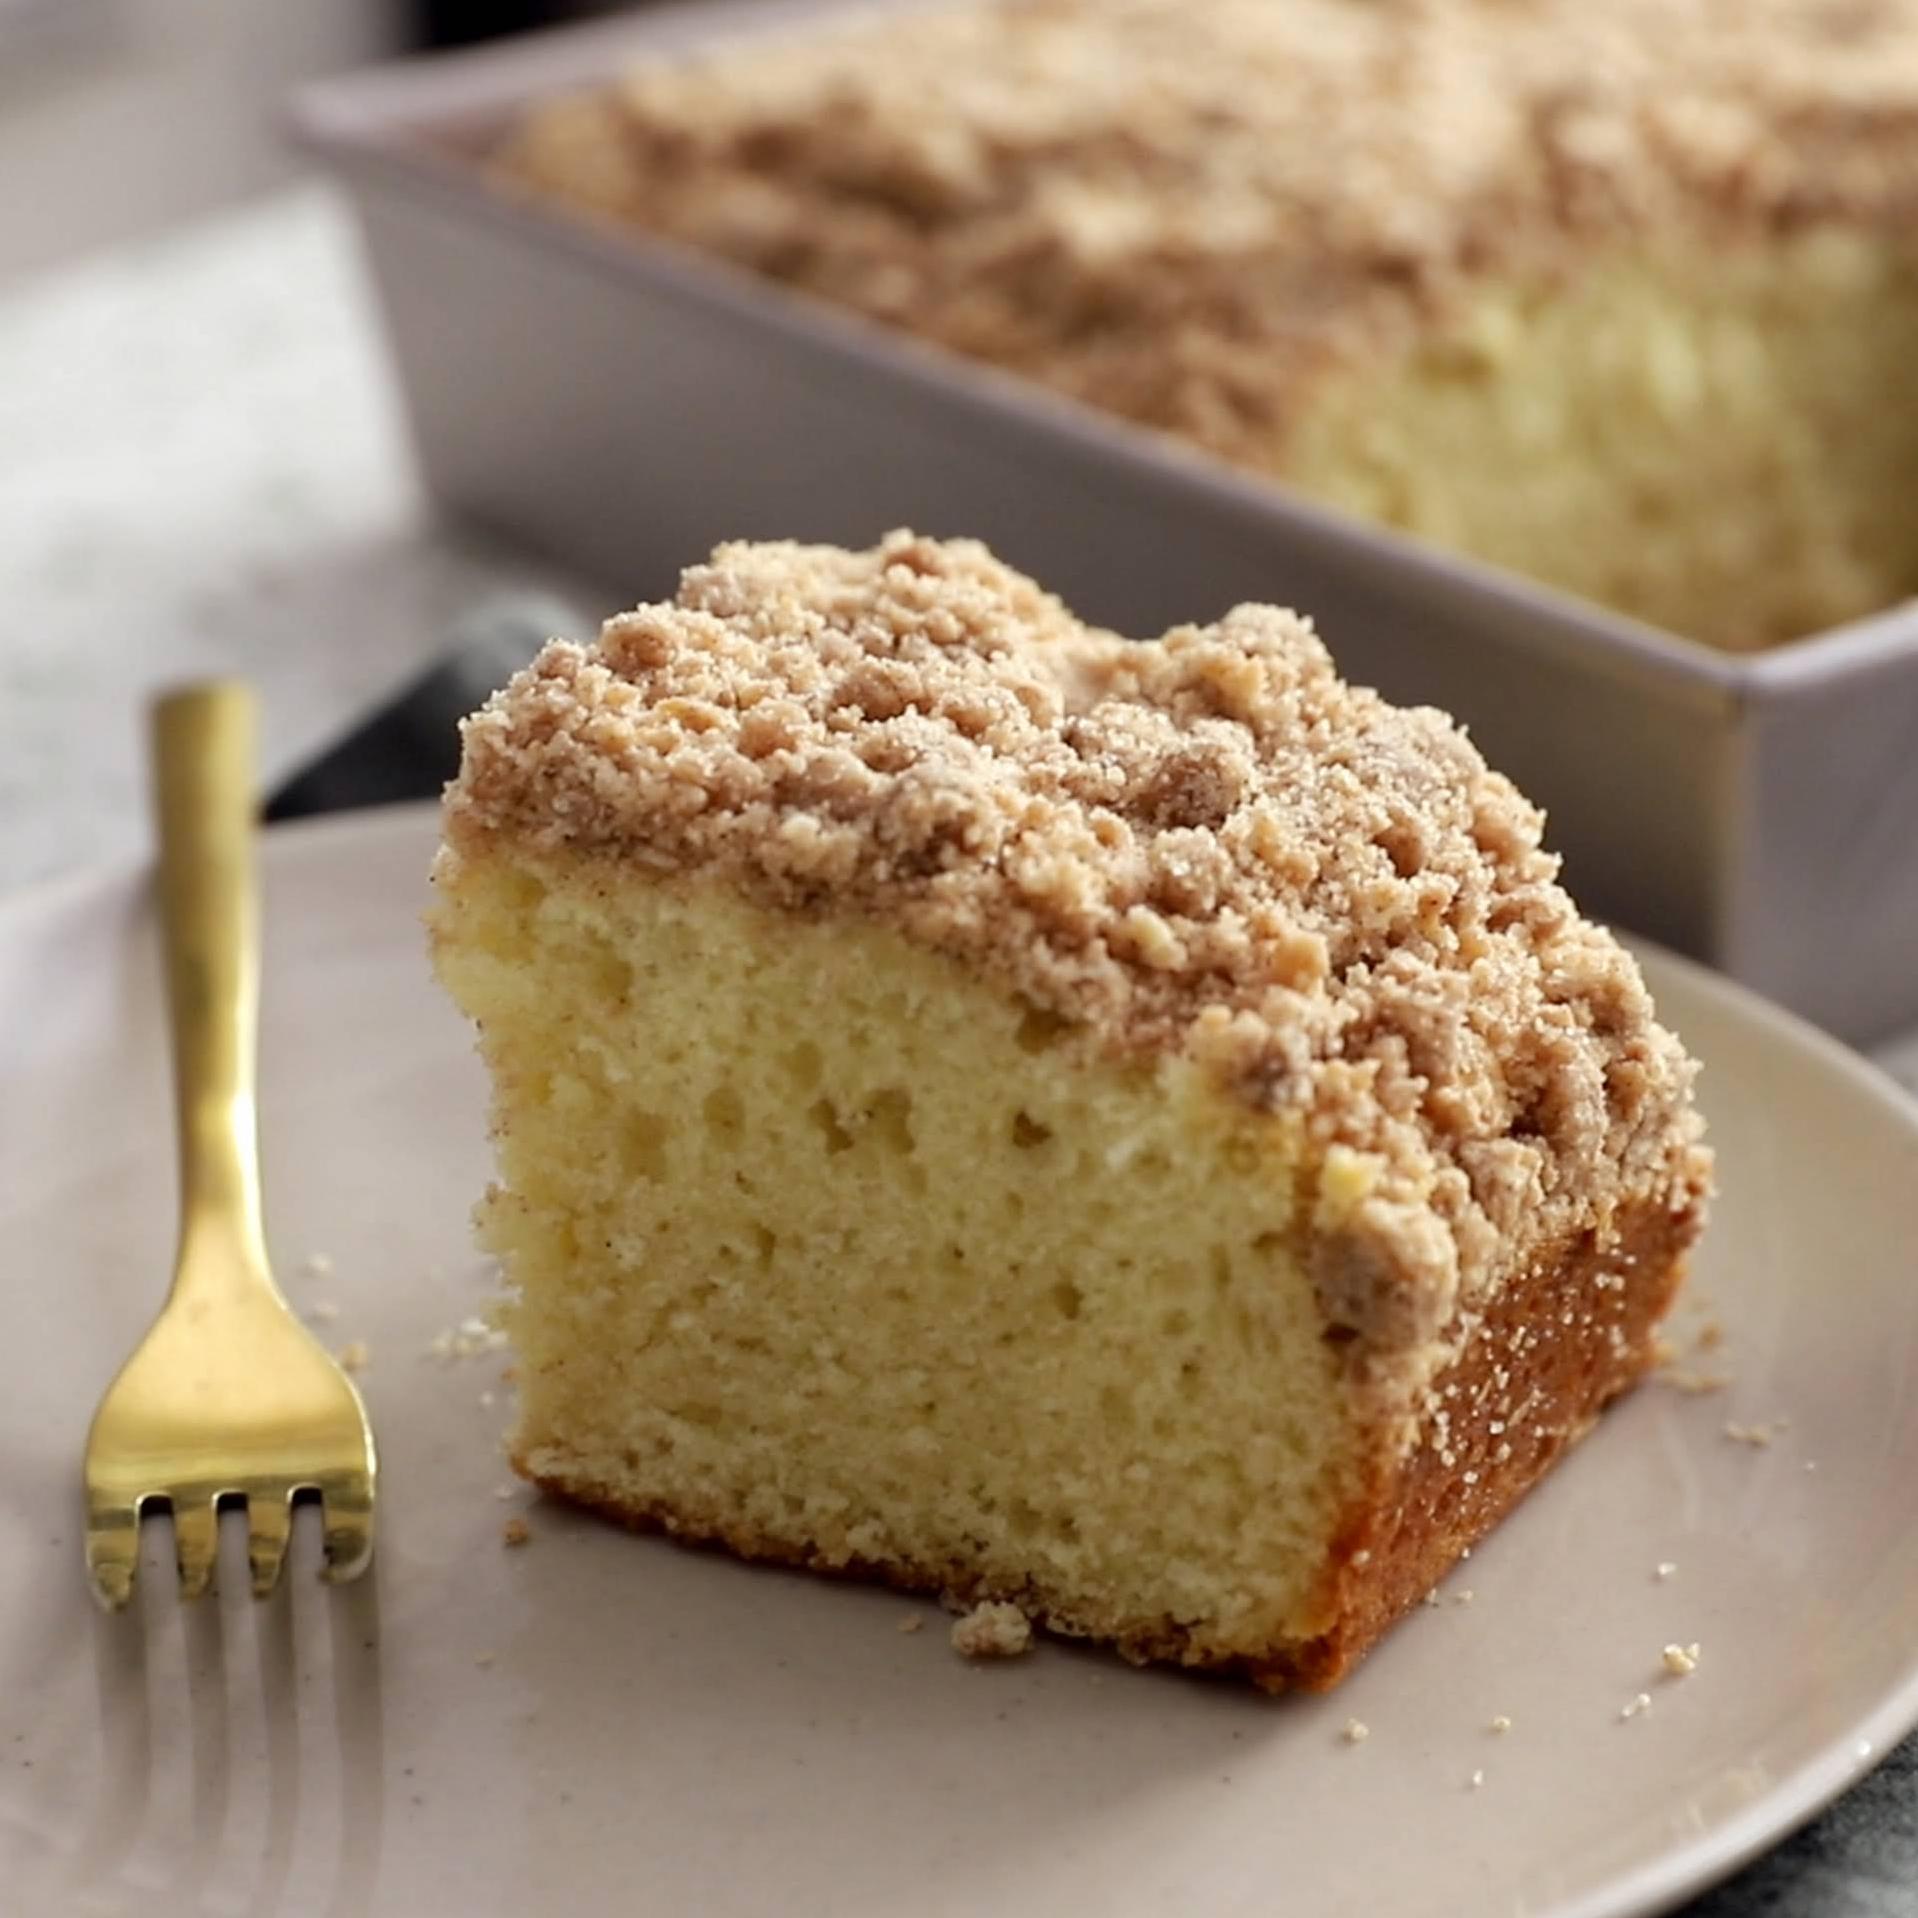  A slice of heaven on a plate - this coffee cake is the perfect way to start your morning!